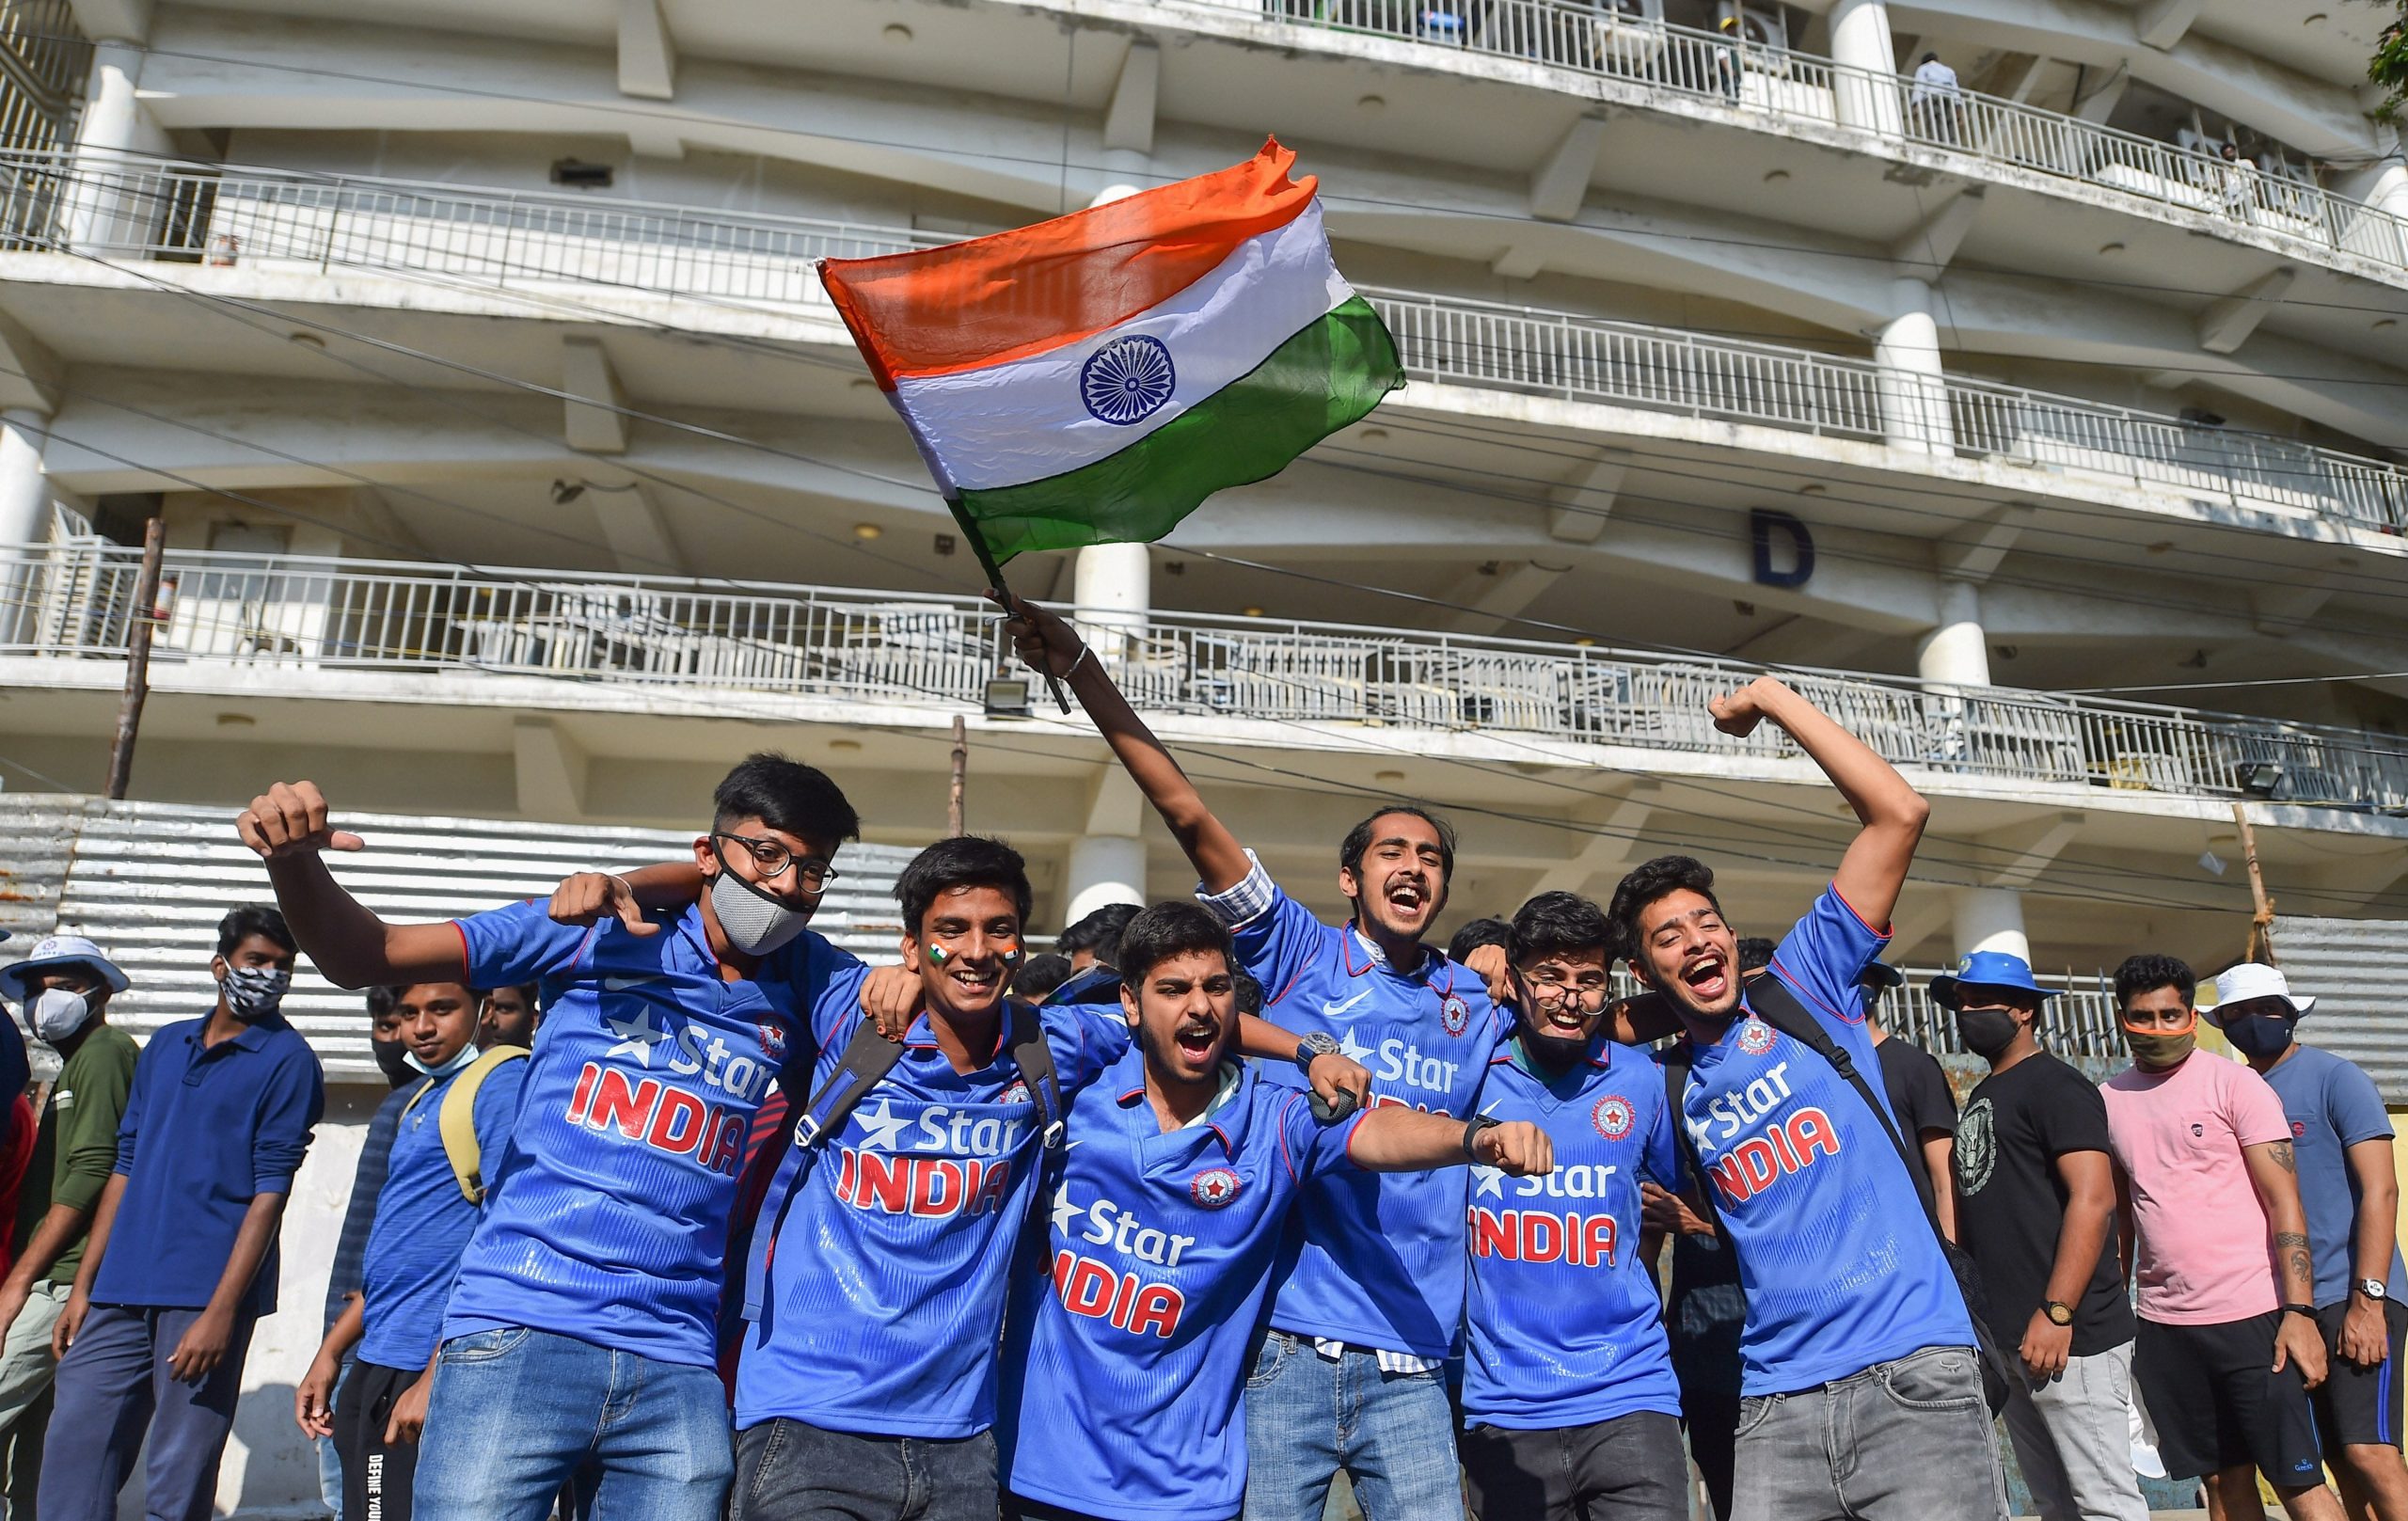 Cricket-crazy Chennai fans rejoice as spectators allowed for 2nd England Test